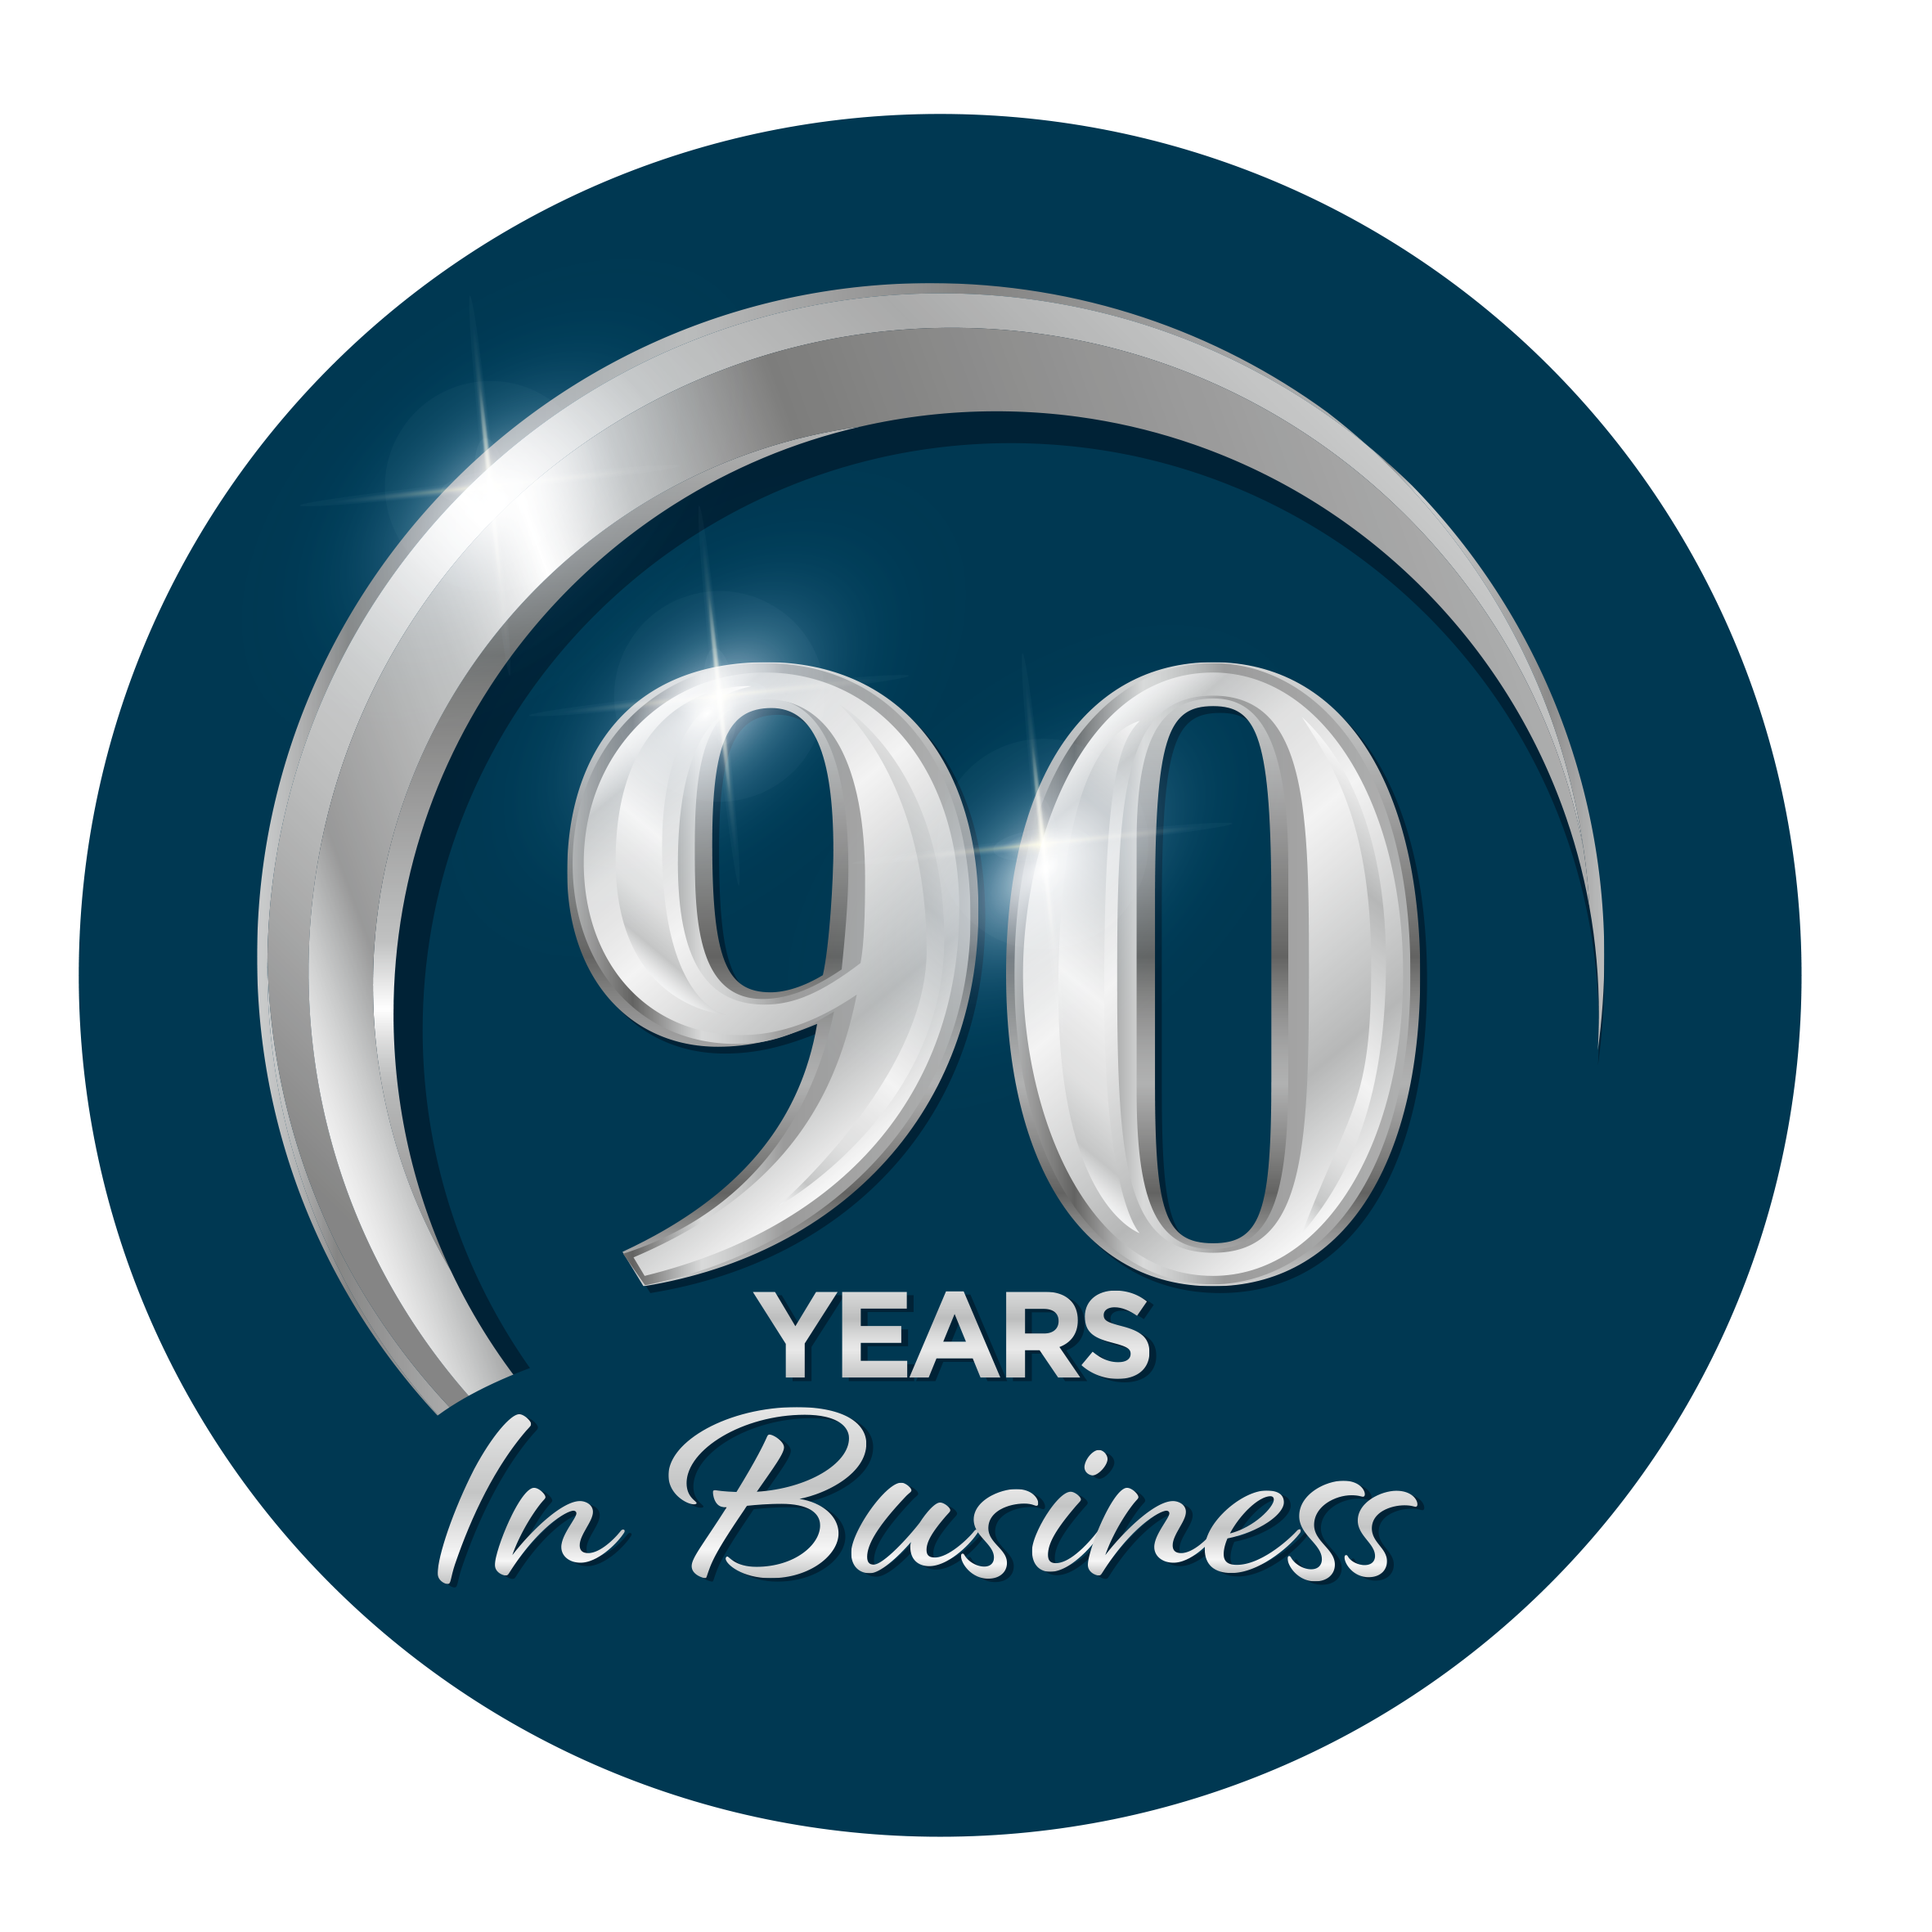 easy2C 90 years in business